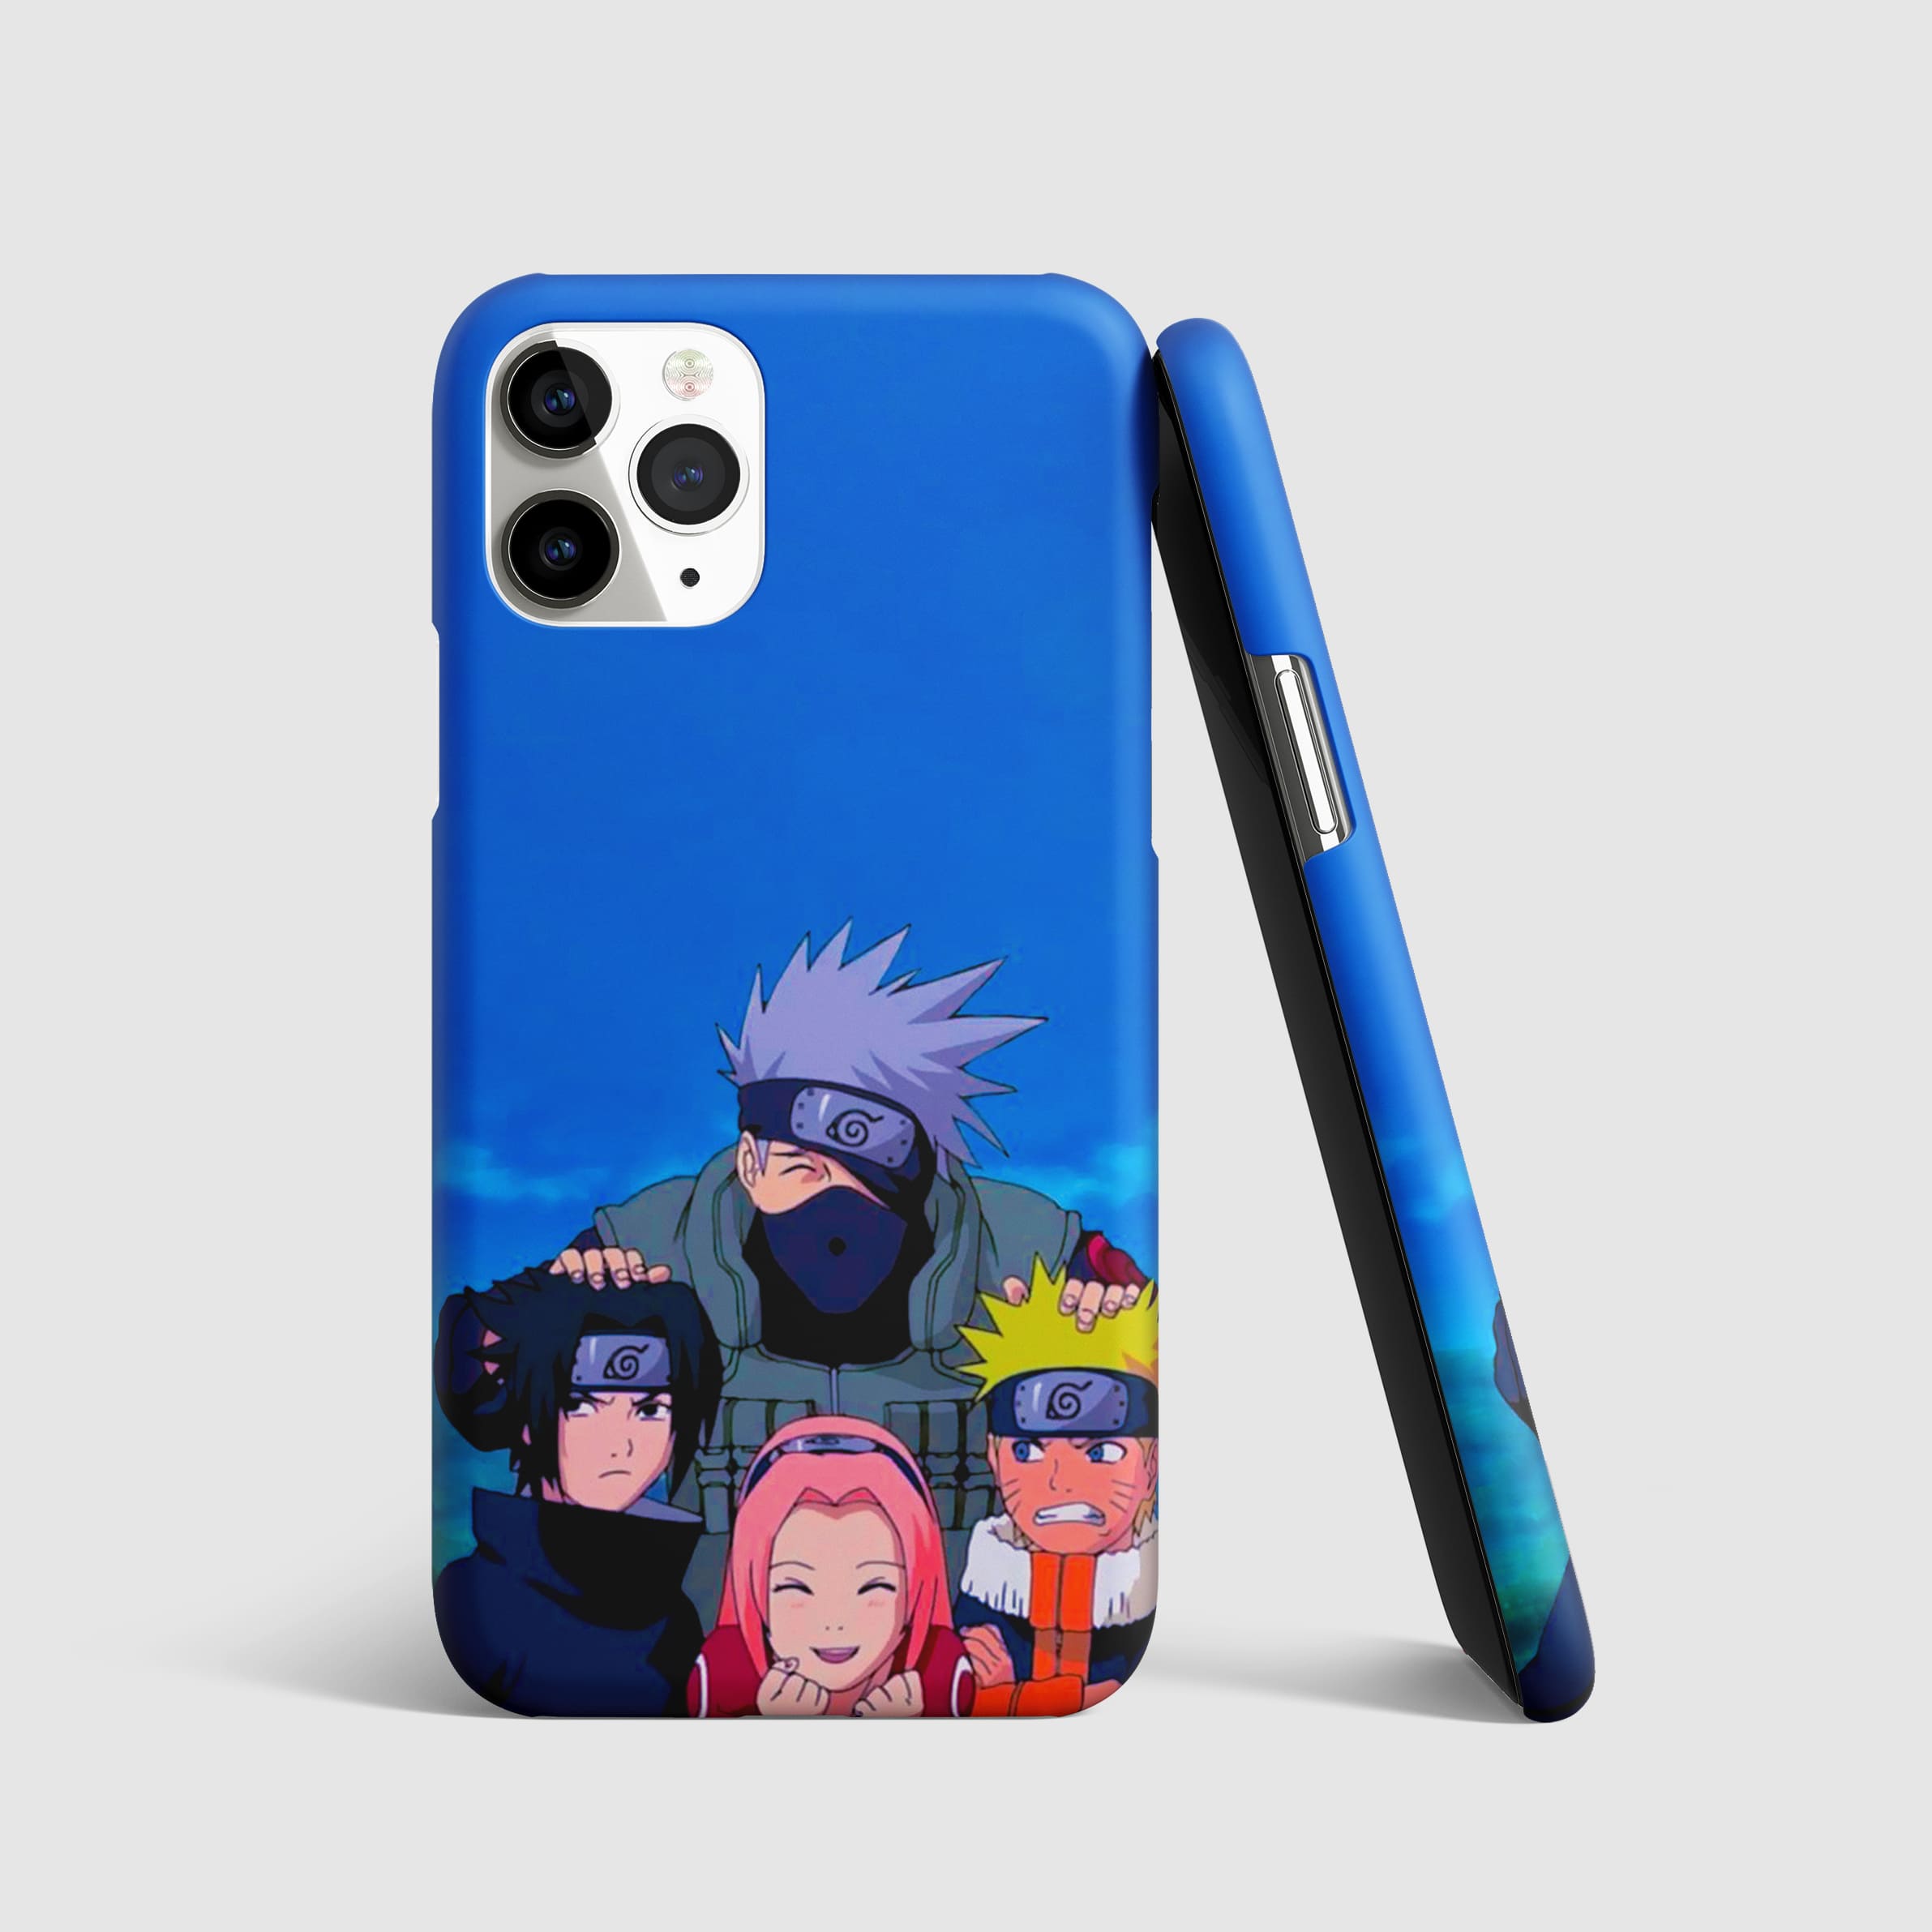 Kakashi Team Phone Cover with 3D matte finish, featuring the iconic Kakashi Hatake and Team 7 design.